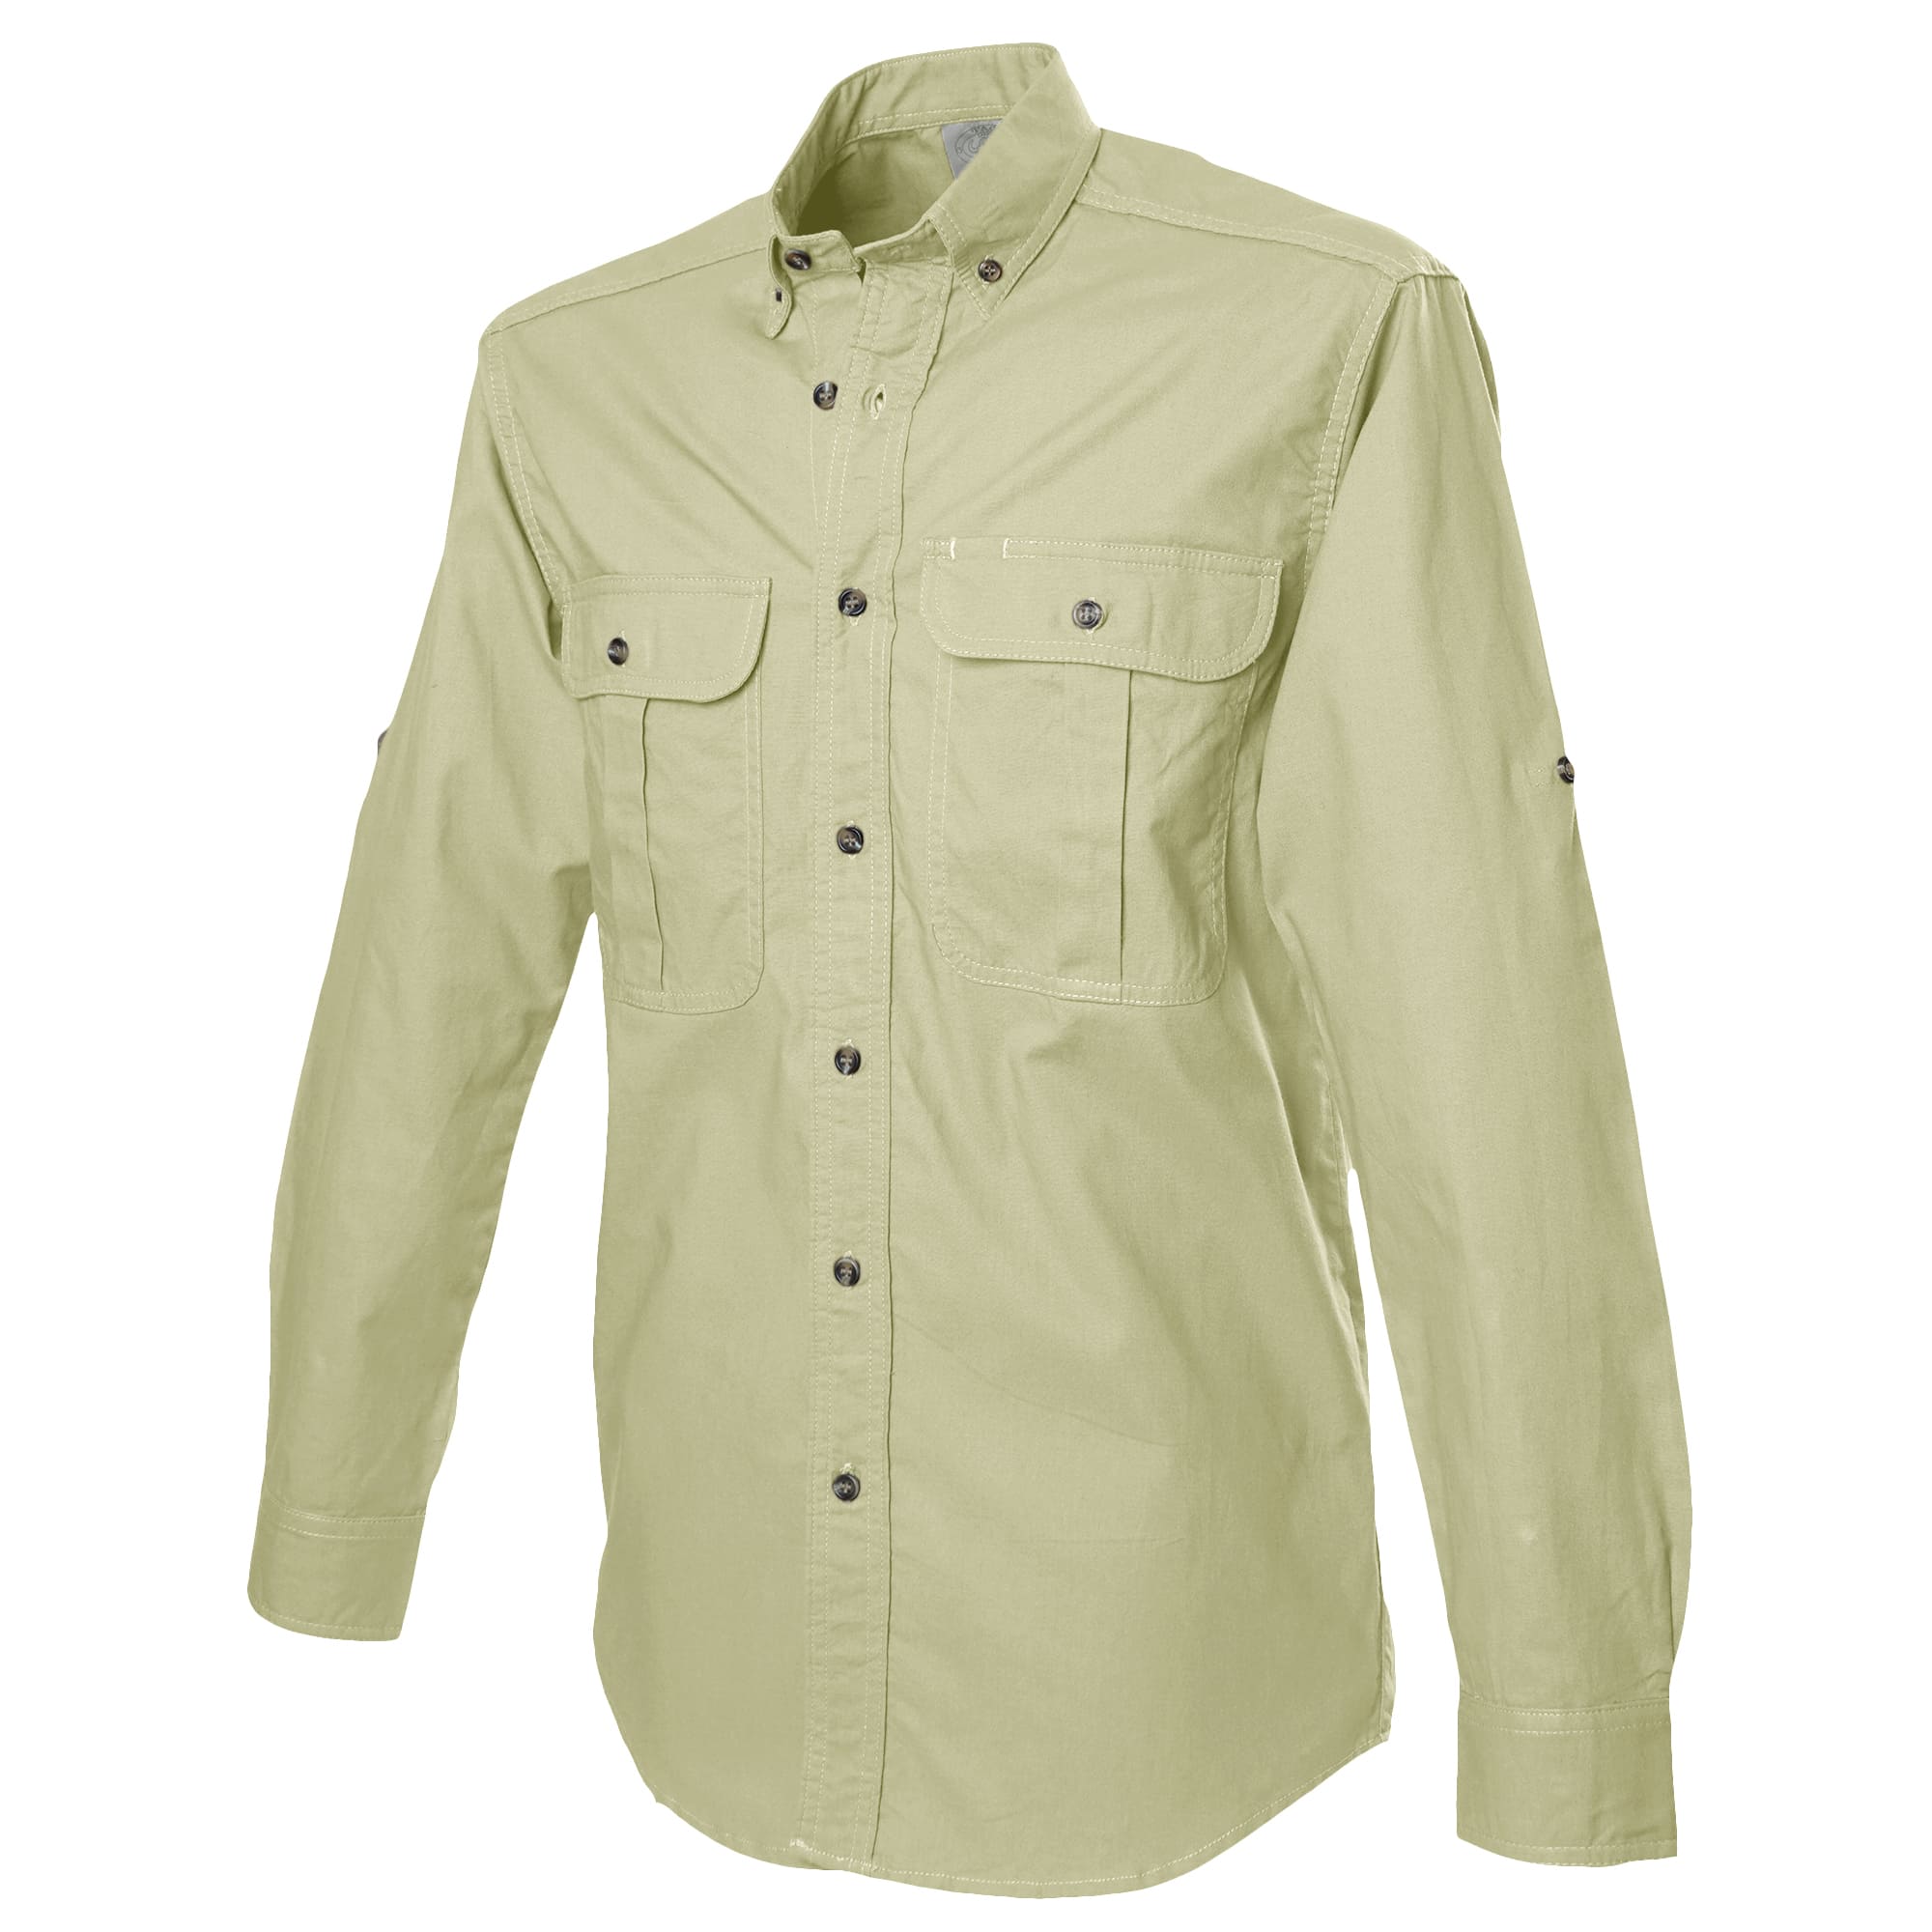 Mens Safari Shirt with Two Button Flap pockets and Button Down Collars 100%  Cotton in Long Sleeves by Tag Safari